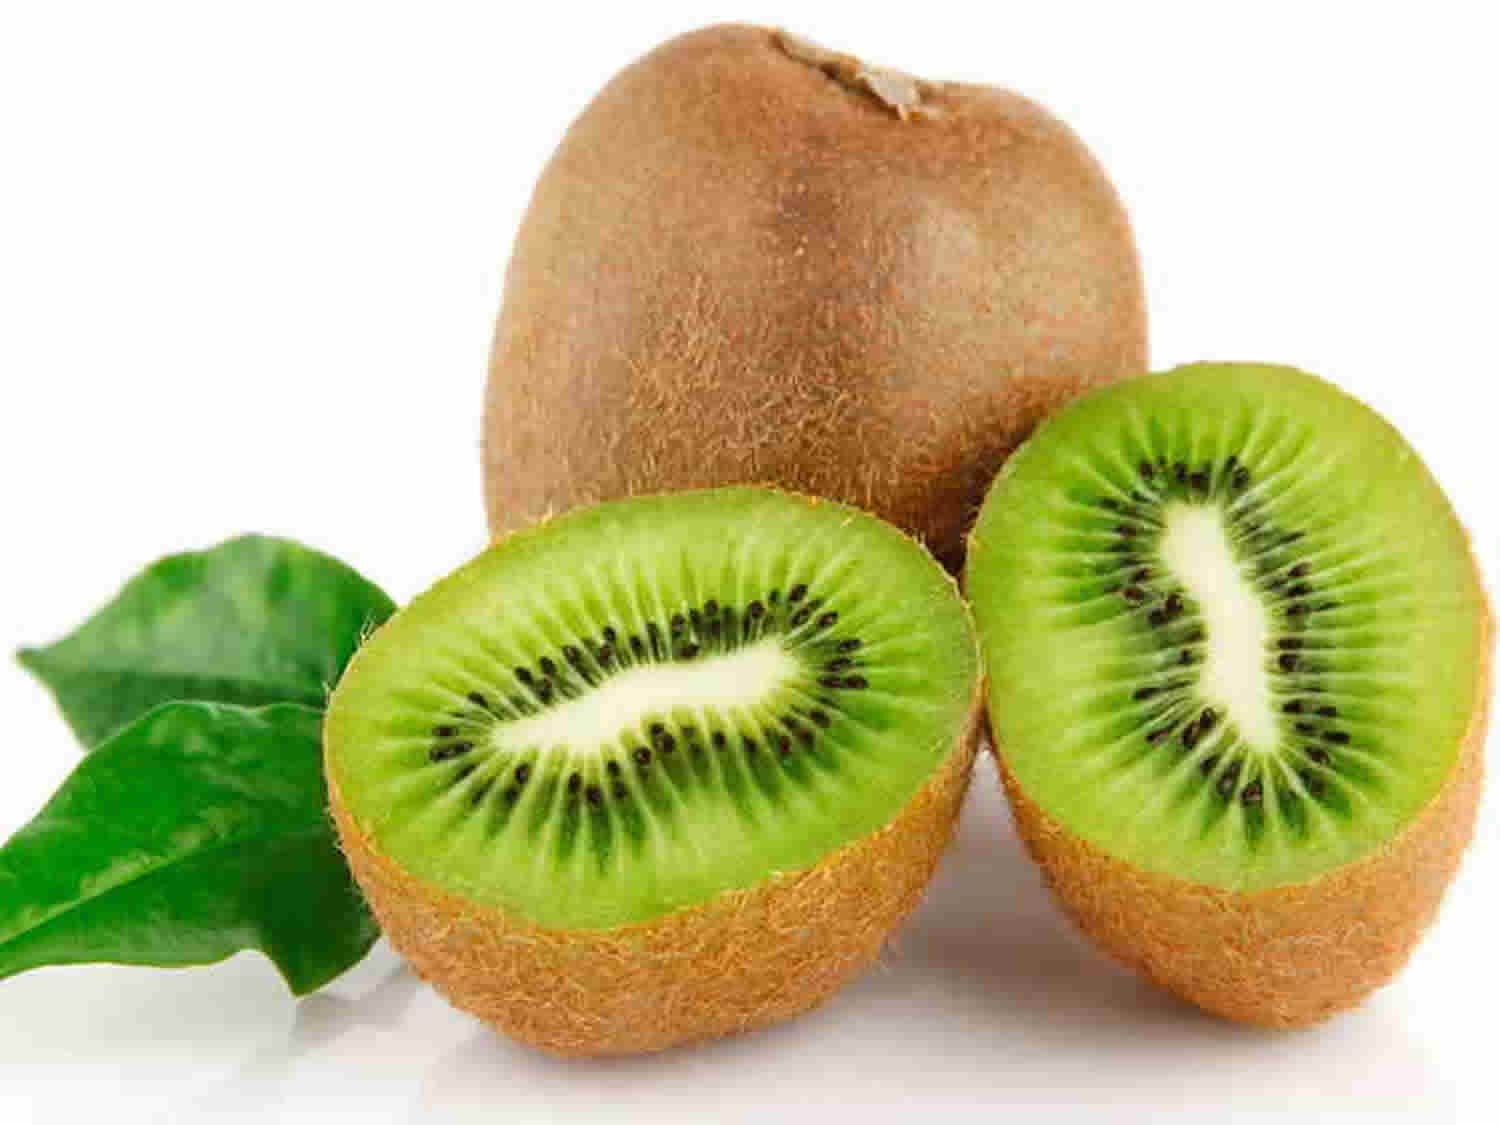 Kiwi Fruits Nutrition Facts And Health Benefits Green And Gold Kiwi Fruits